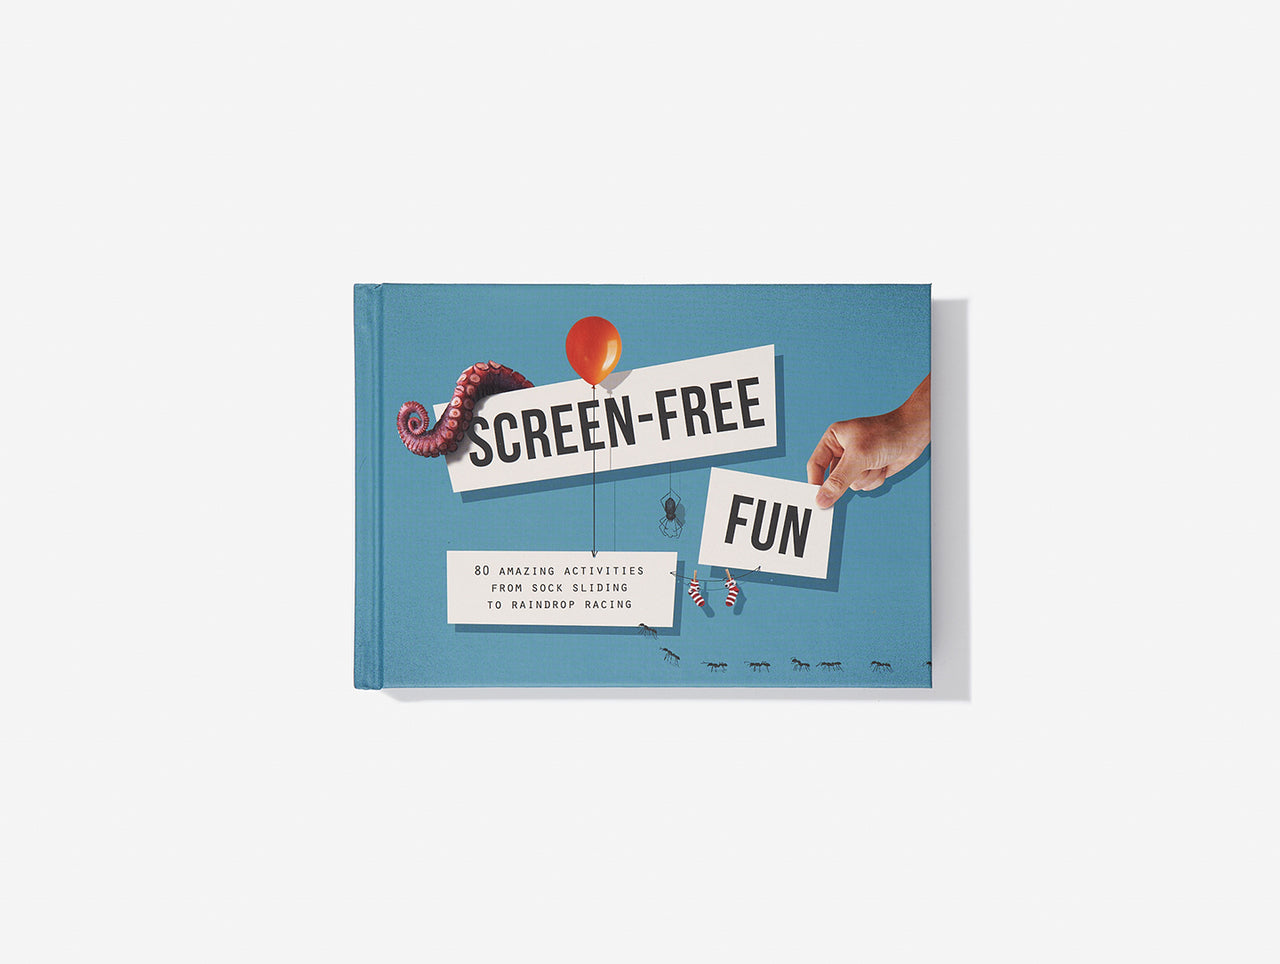 An image of a blue book with the words 'SCREEN-FREE FUN' at the centre, with a hand, a tentacle and a balloon.